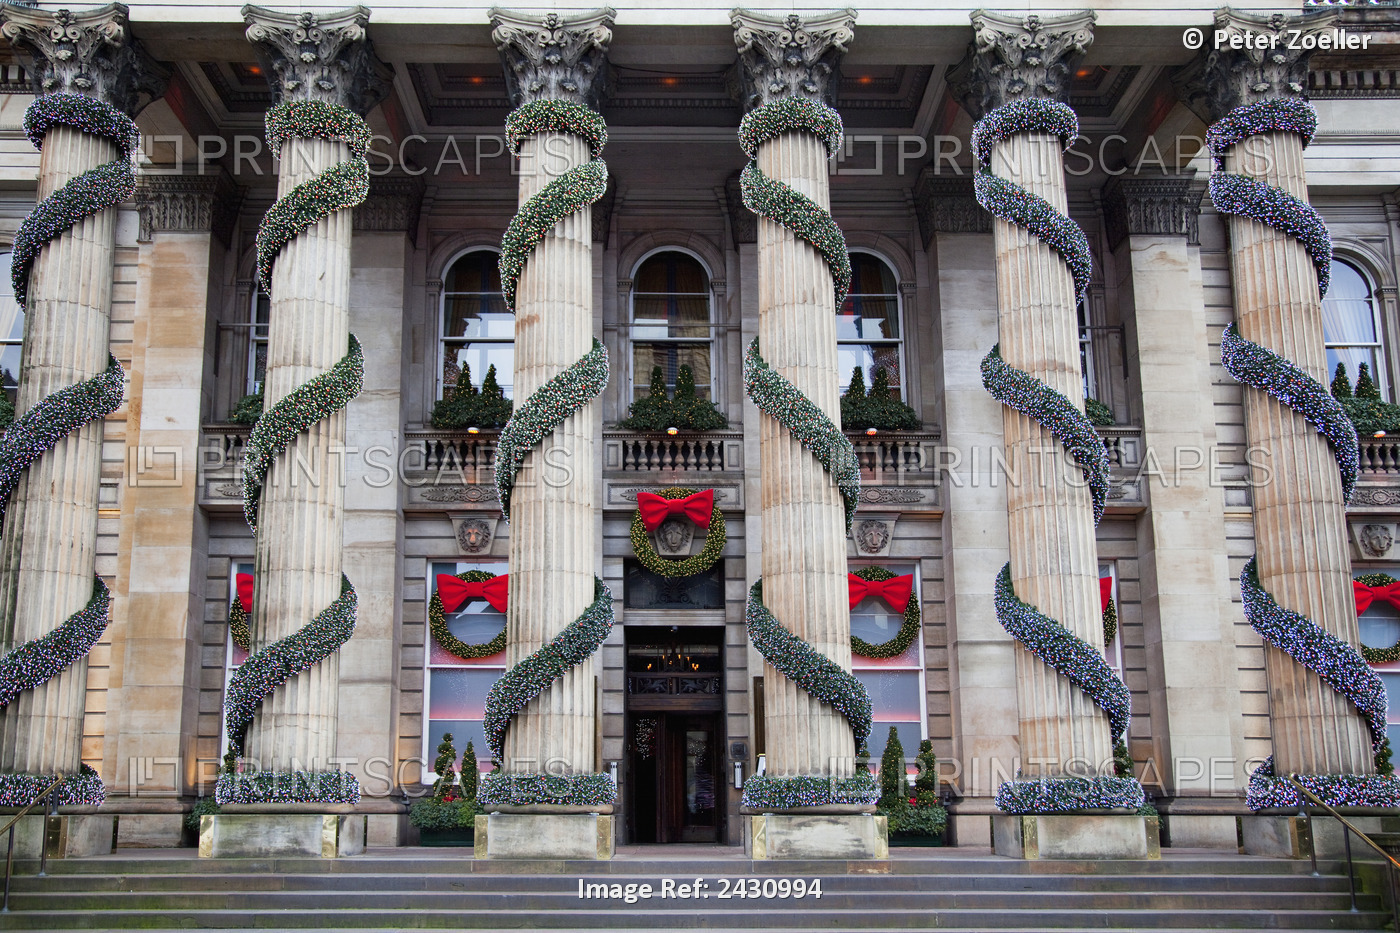 A Building With Columns Decorated With Garland And Wreaths At Christmas; ...